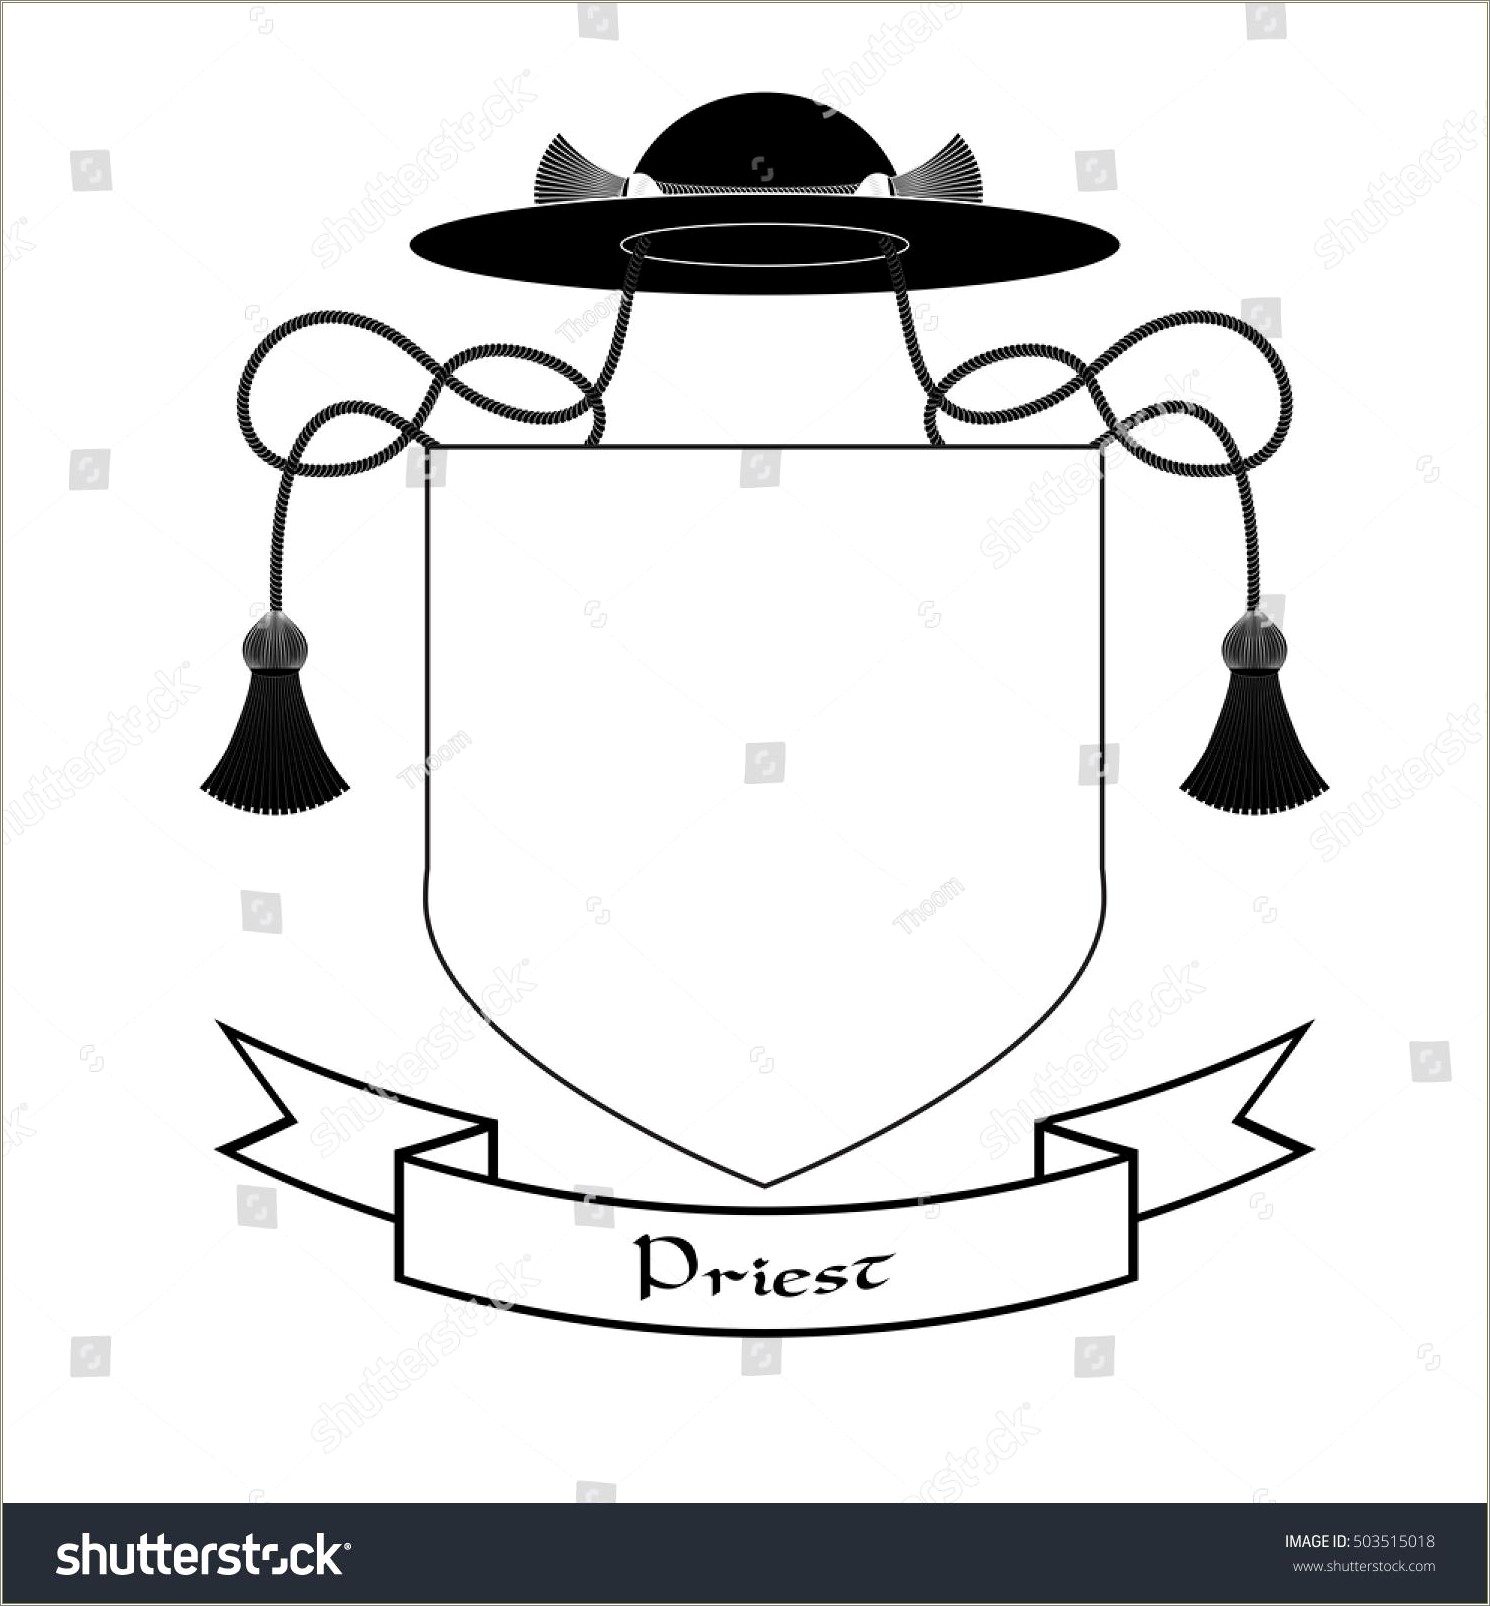 Free Coat Of Arms Template Maker